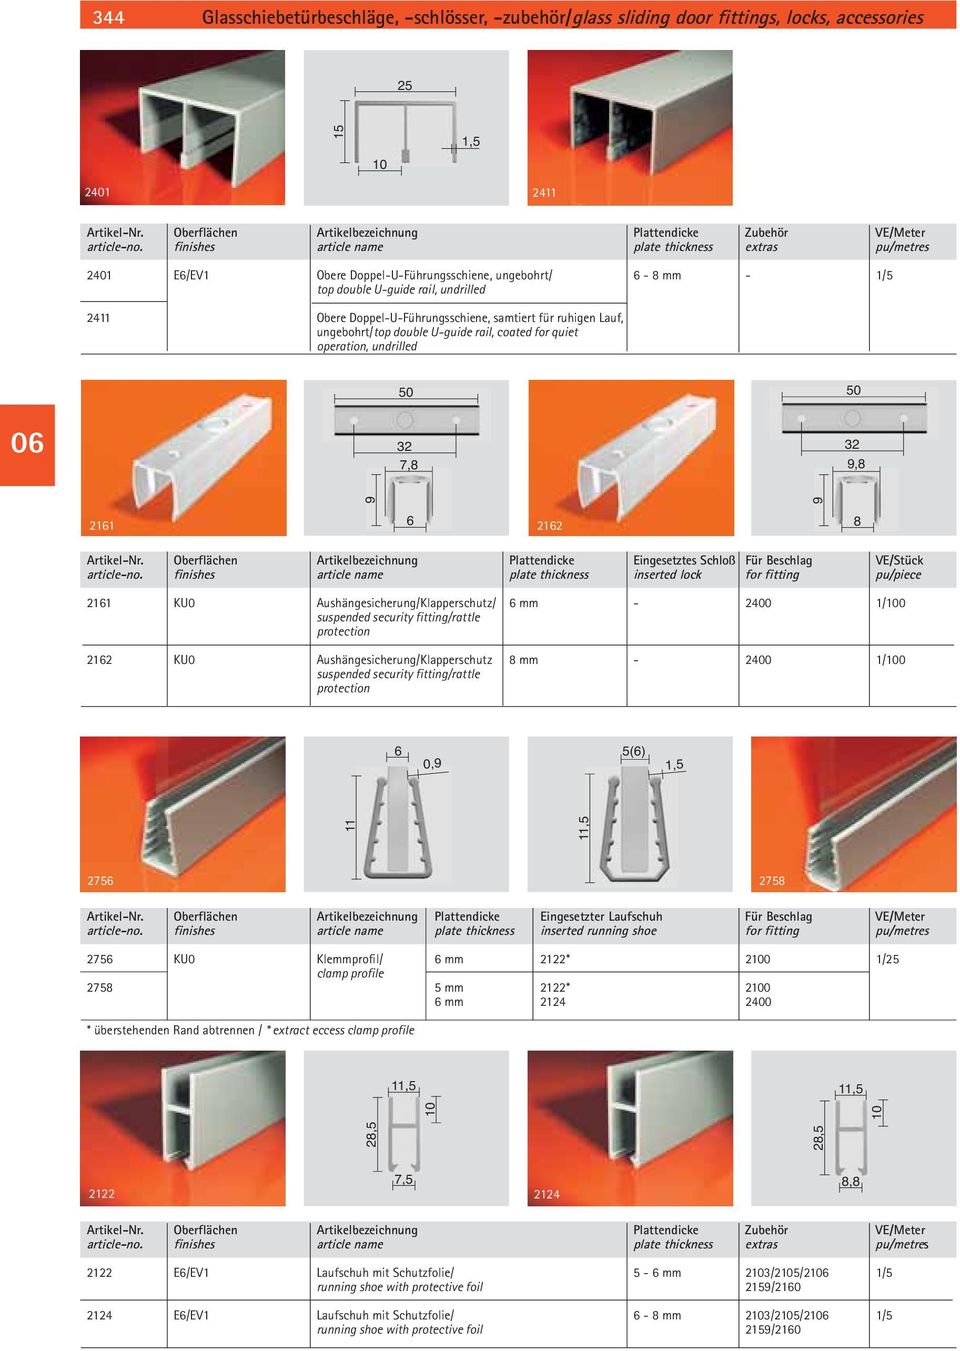 finishes article name plate thickness extras pu/metres 2401 E6/EV1 Obere Doppel-U-Führungsschiene, ungebohrt/ 6-8 mm - 1/5 top double U-guide rail, undrilled 2411 Obere Doppel-U-Führungsschiene,